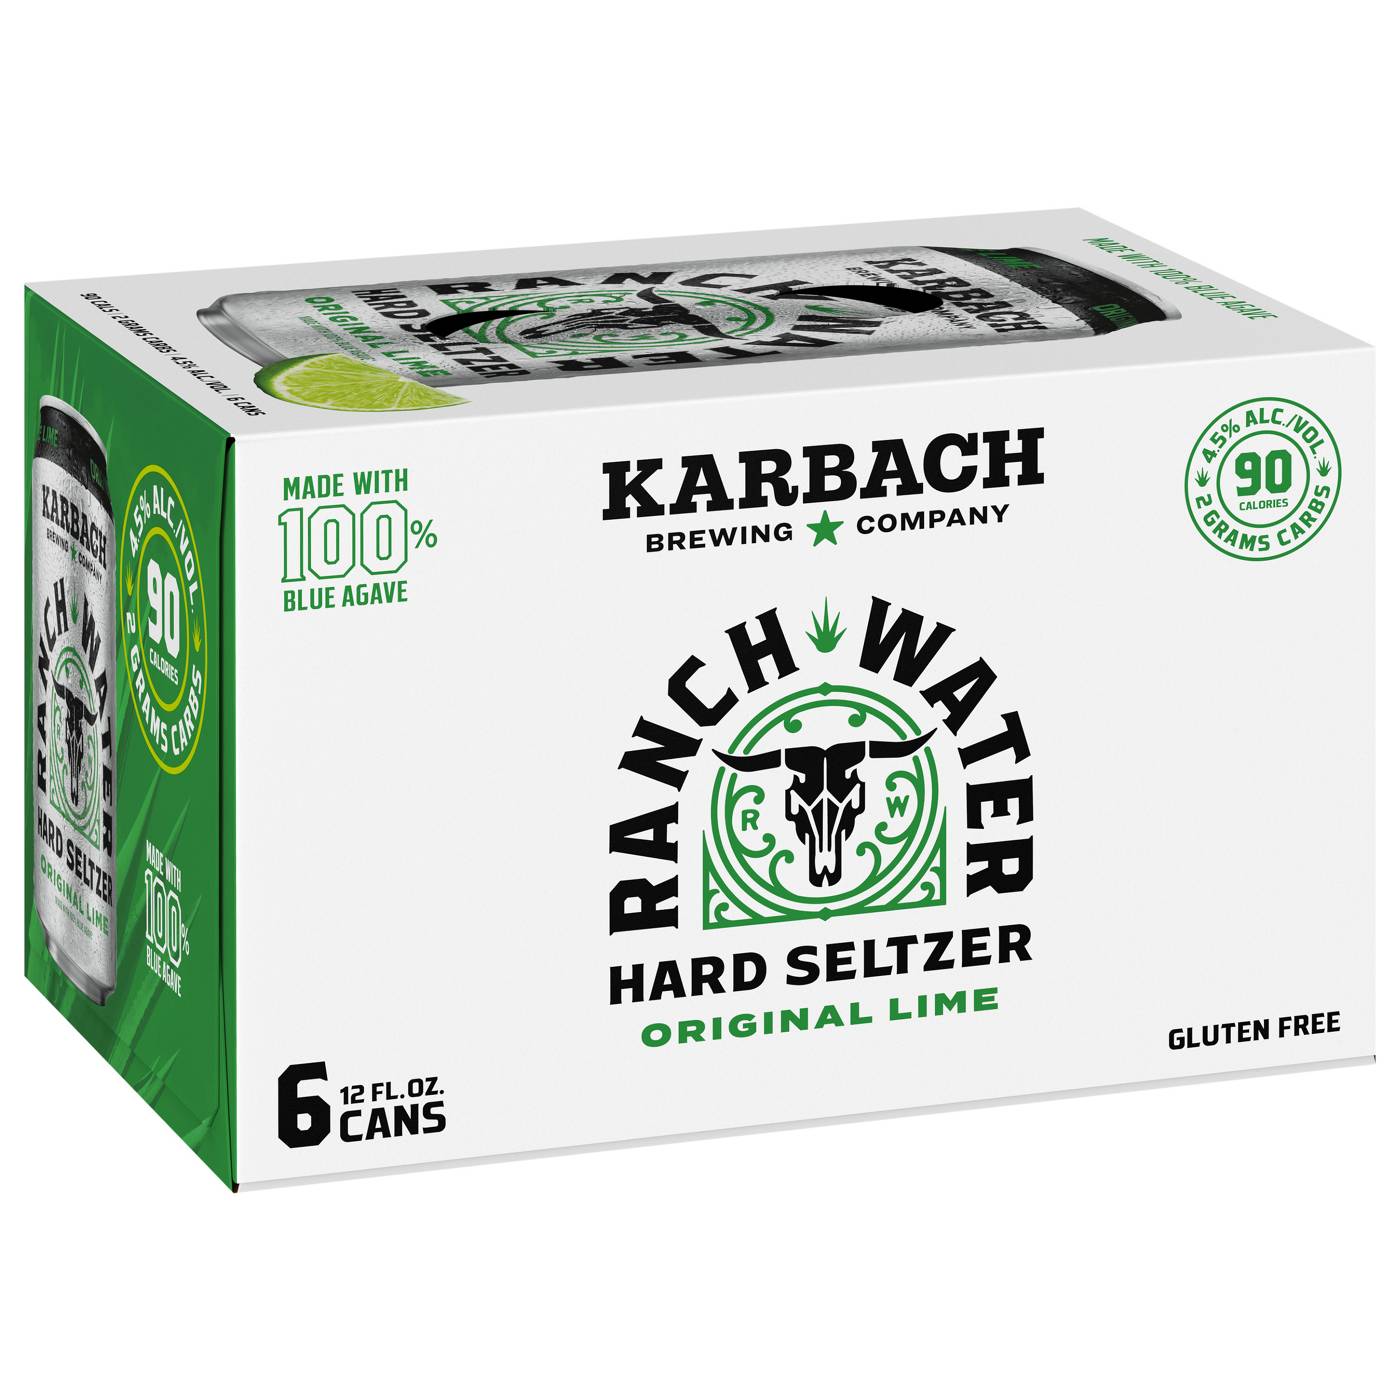 Karbach Original Lime Ranch Water Hard Seltzer 6 pk Cans; image 1 of 2